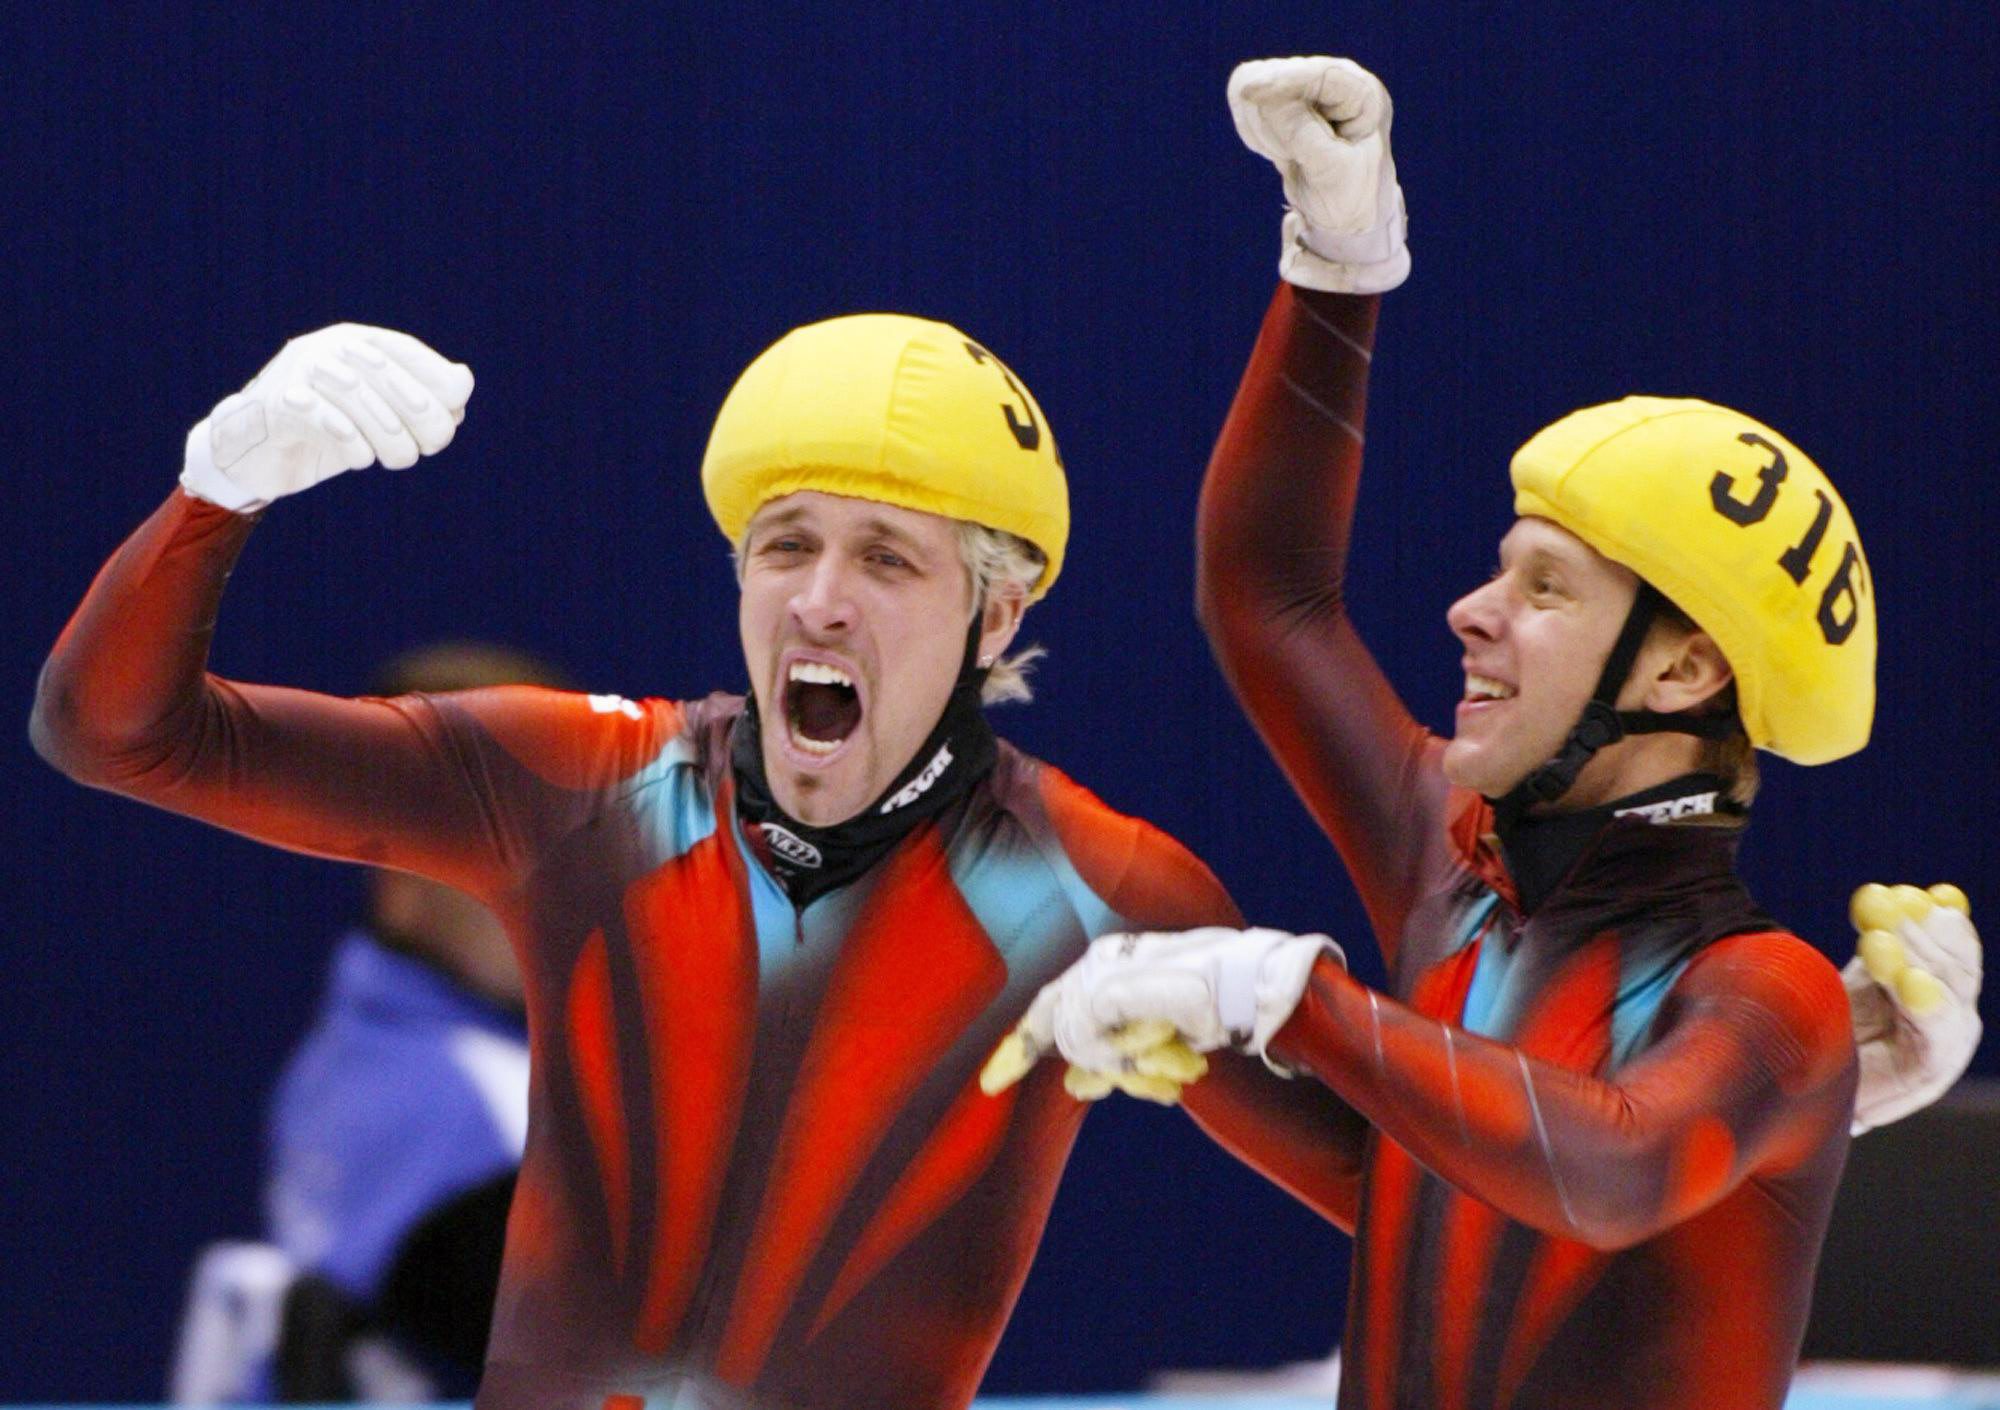 Two speed skaters celebrate with arms up